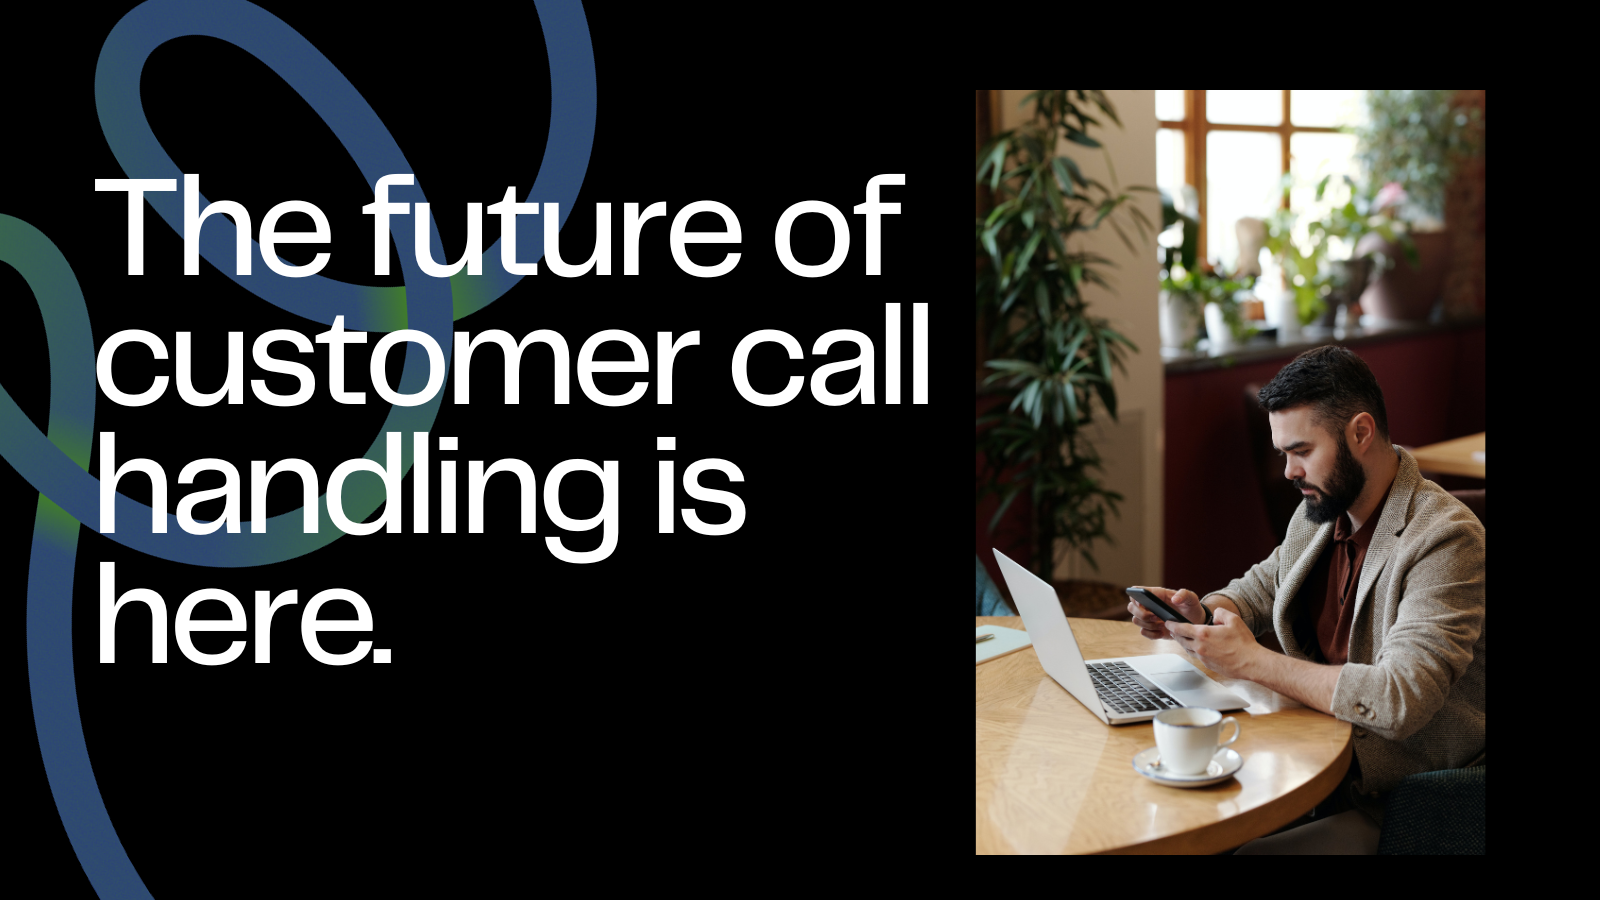 The Future of customer call handling for Shopify